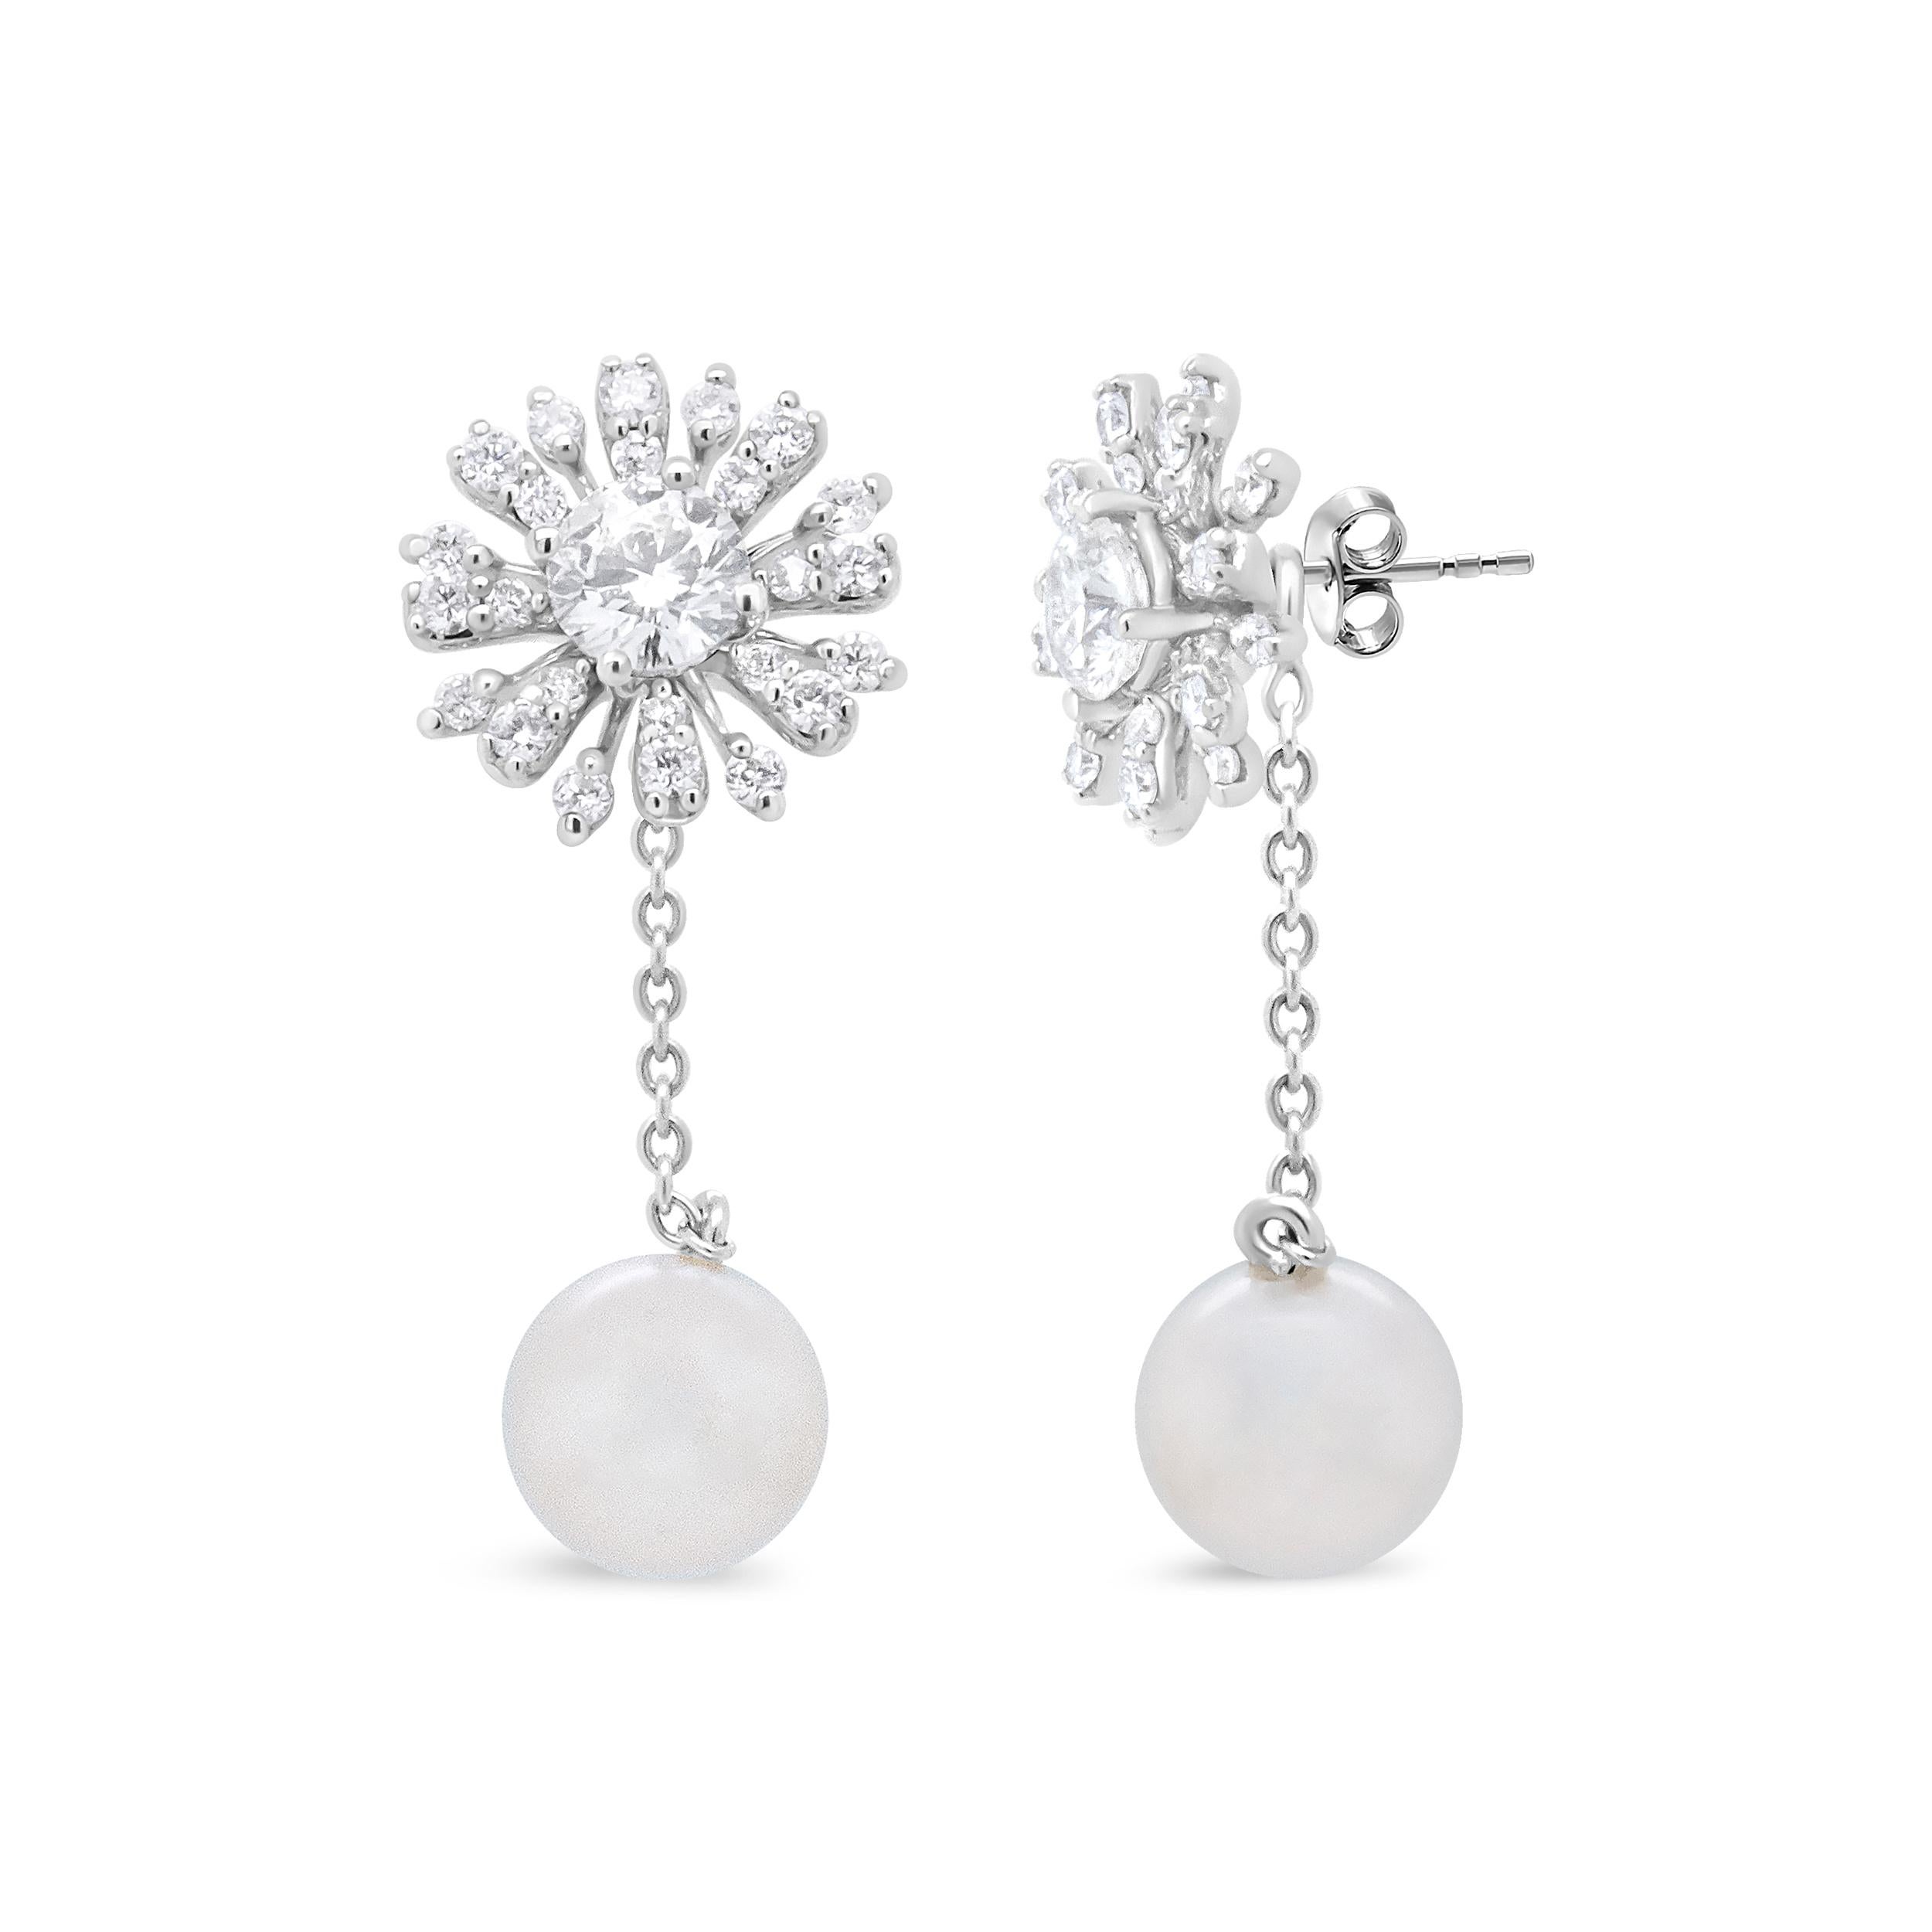 Contemporary 18K White Gold 1.0 Ct Diamond Cultured Freshwater Pearl Floral Drop Stud Earring